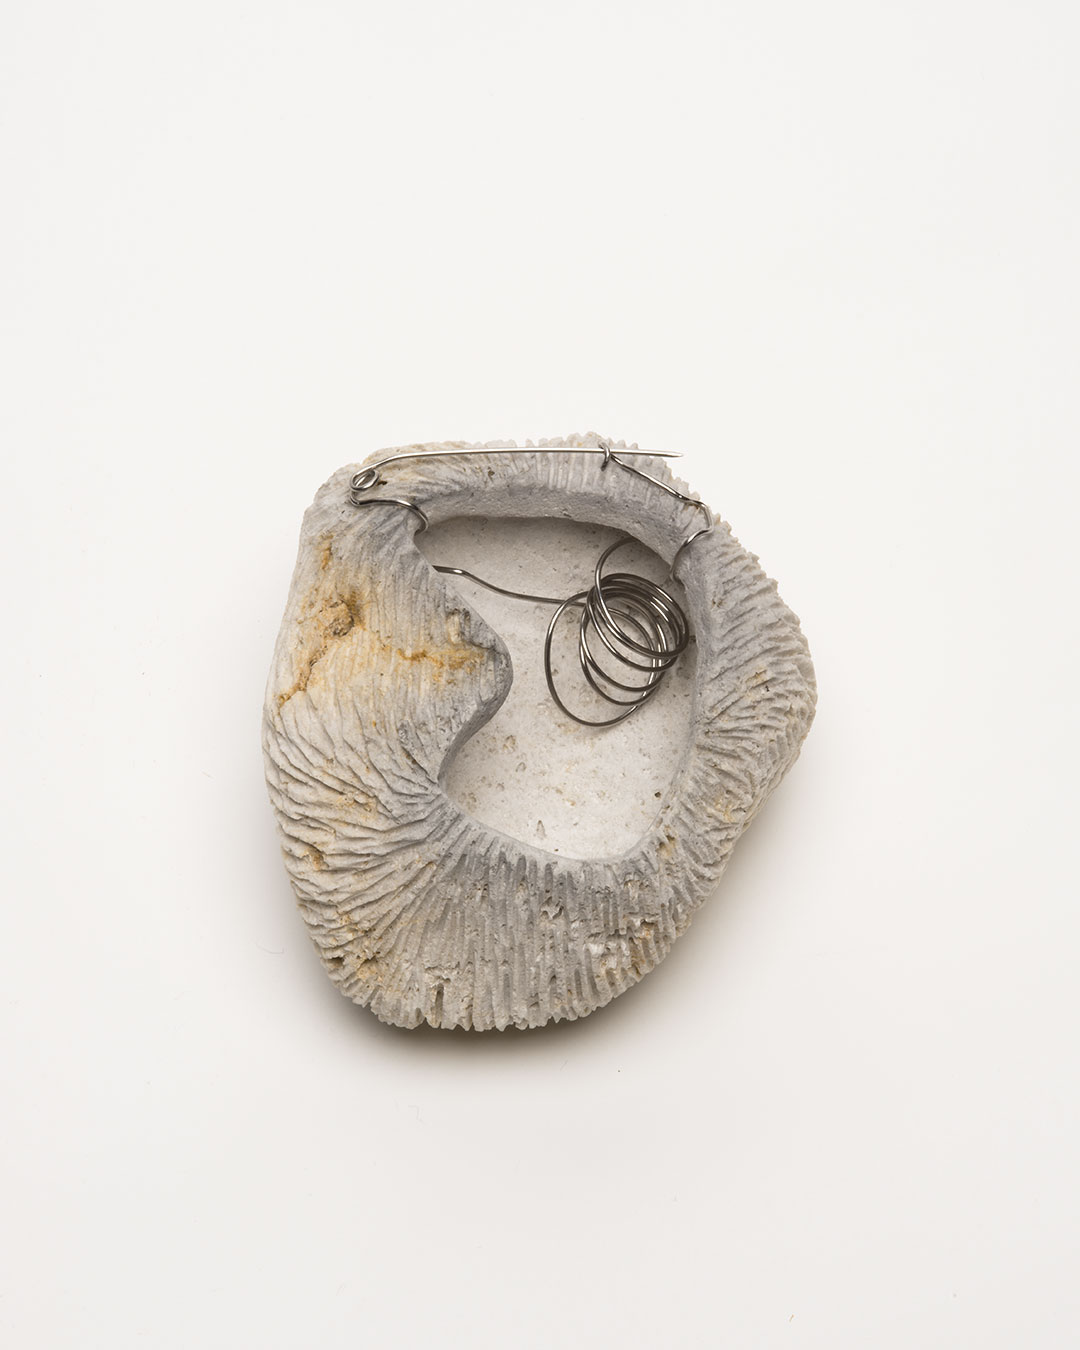 Vivi Touloumidi, What Will the Cosmos Say 2013, brooch; pumice stone, steel, 100 x 70 x 50 mm, €280 (image: back)